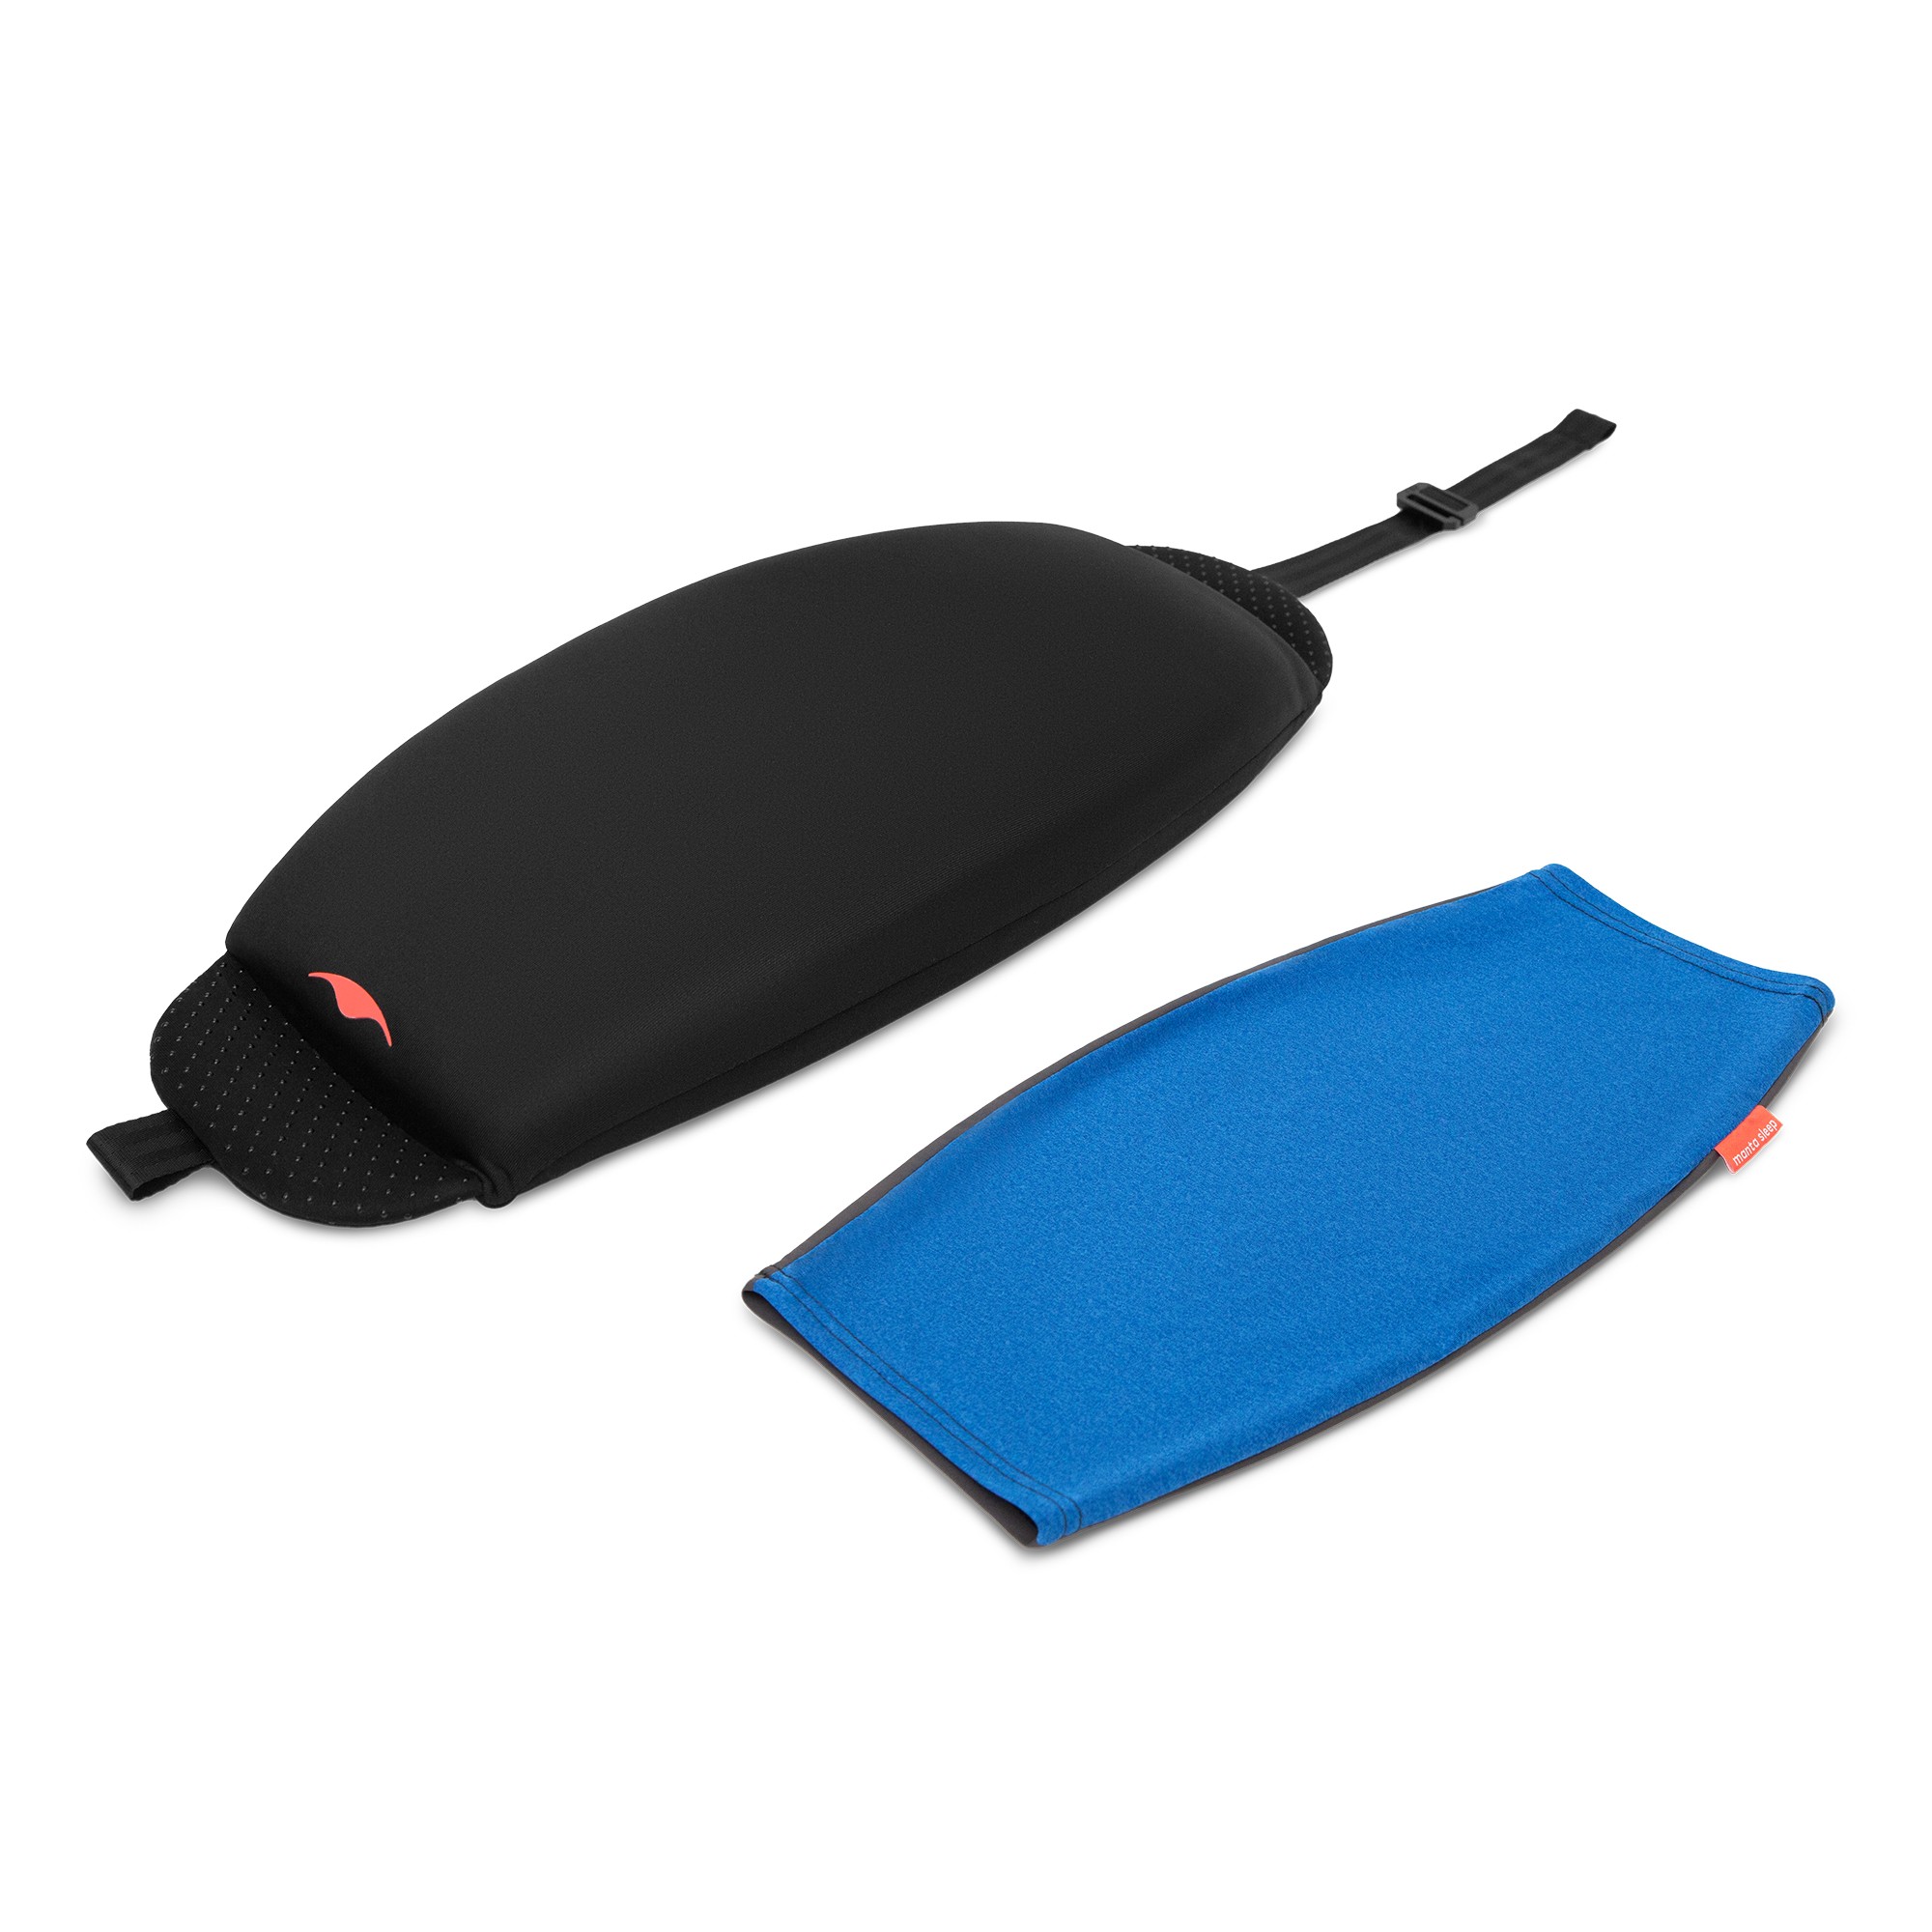 A black nap pillow with a blue cover for power napping at work.